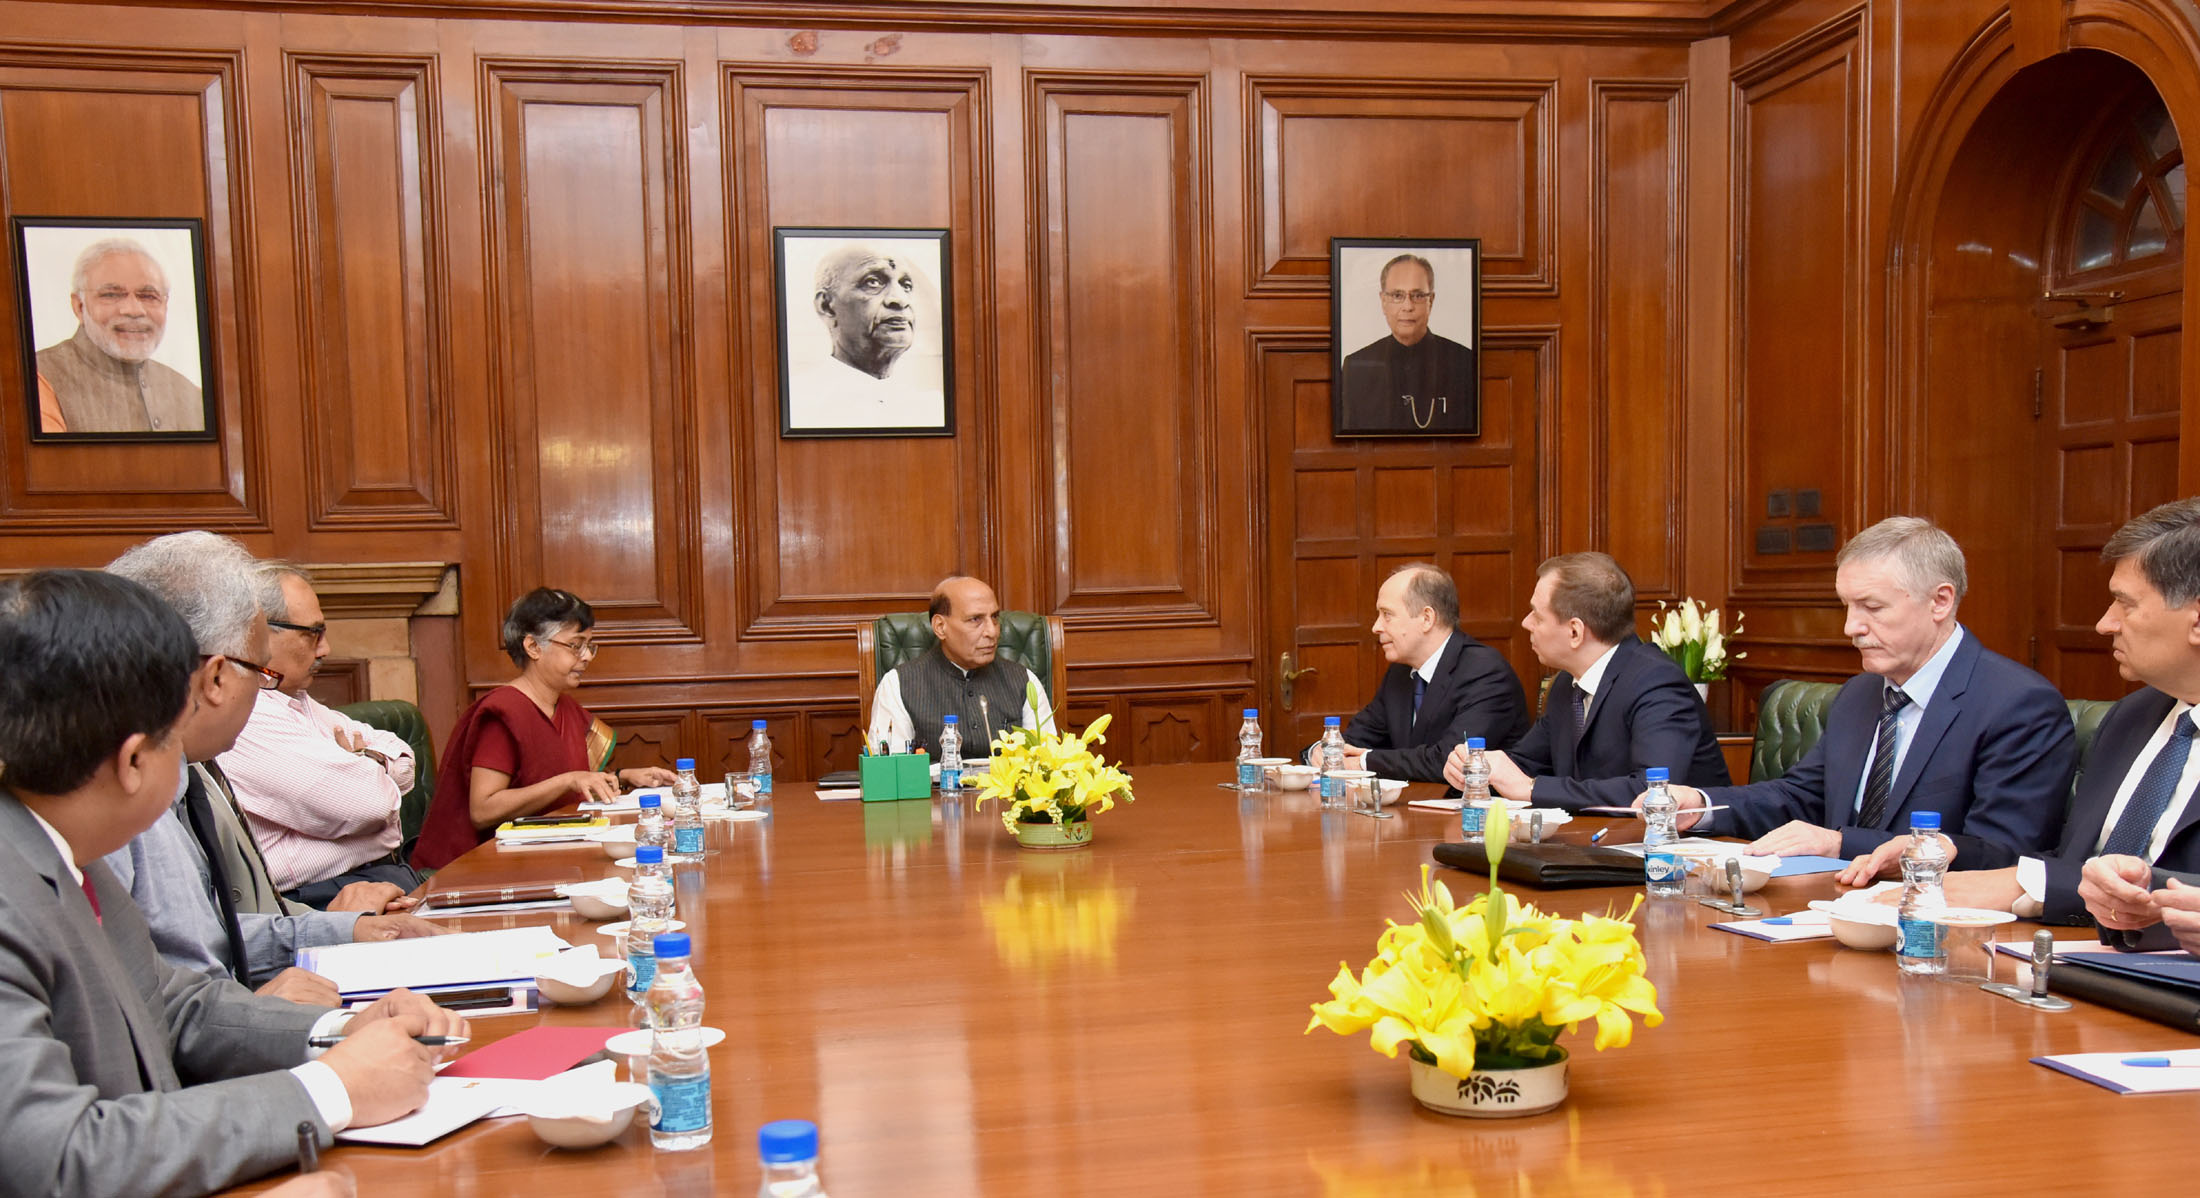 A Russian delegation led by the Director of the Federal Security Service, Russia, Mr. Alexander Bortnikov calling on the Union Home Minister, Shri Rajnath Singh, in New Delhi on March 24, 2017. The Union Home Secretary Shri Rajiv Mehrishi and senior officers are also seen.